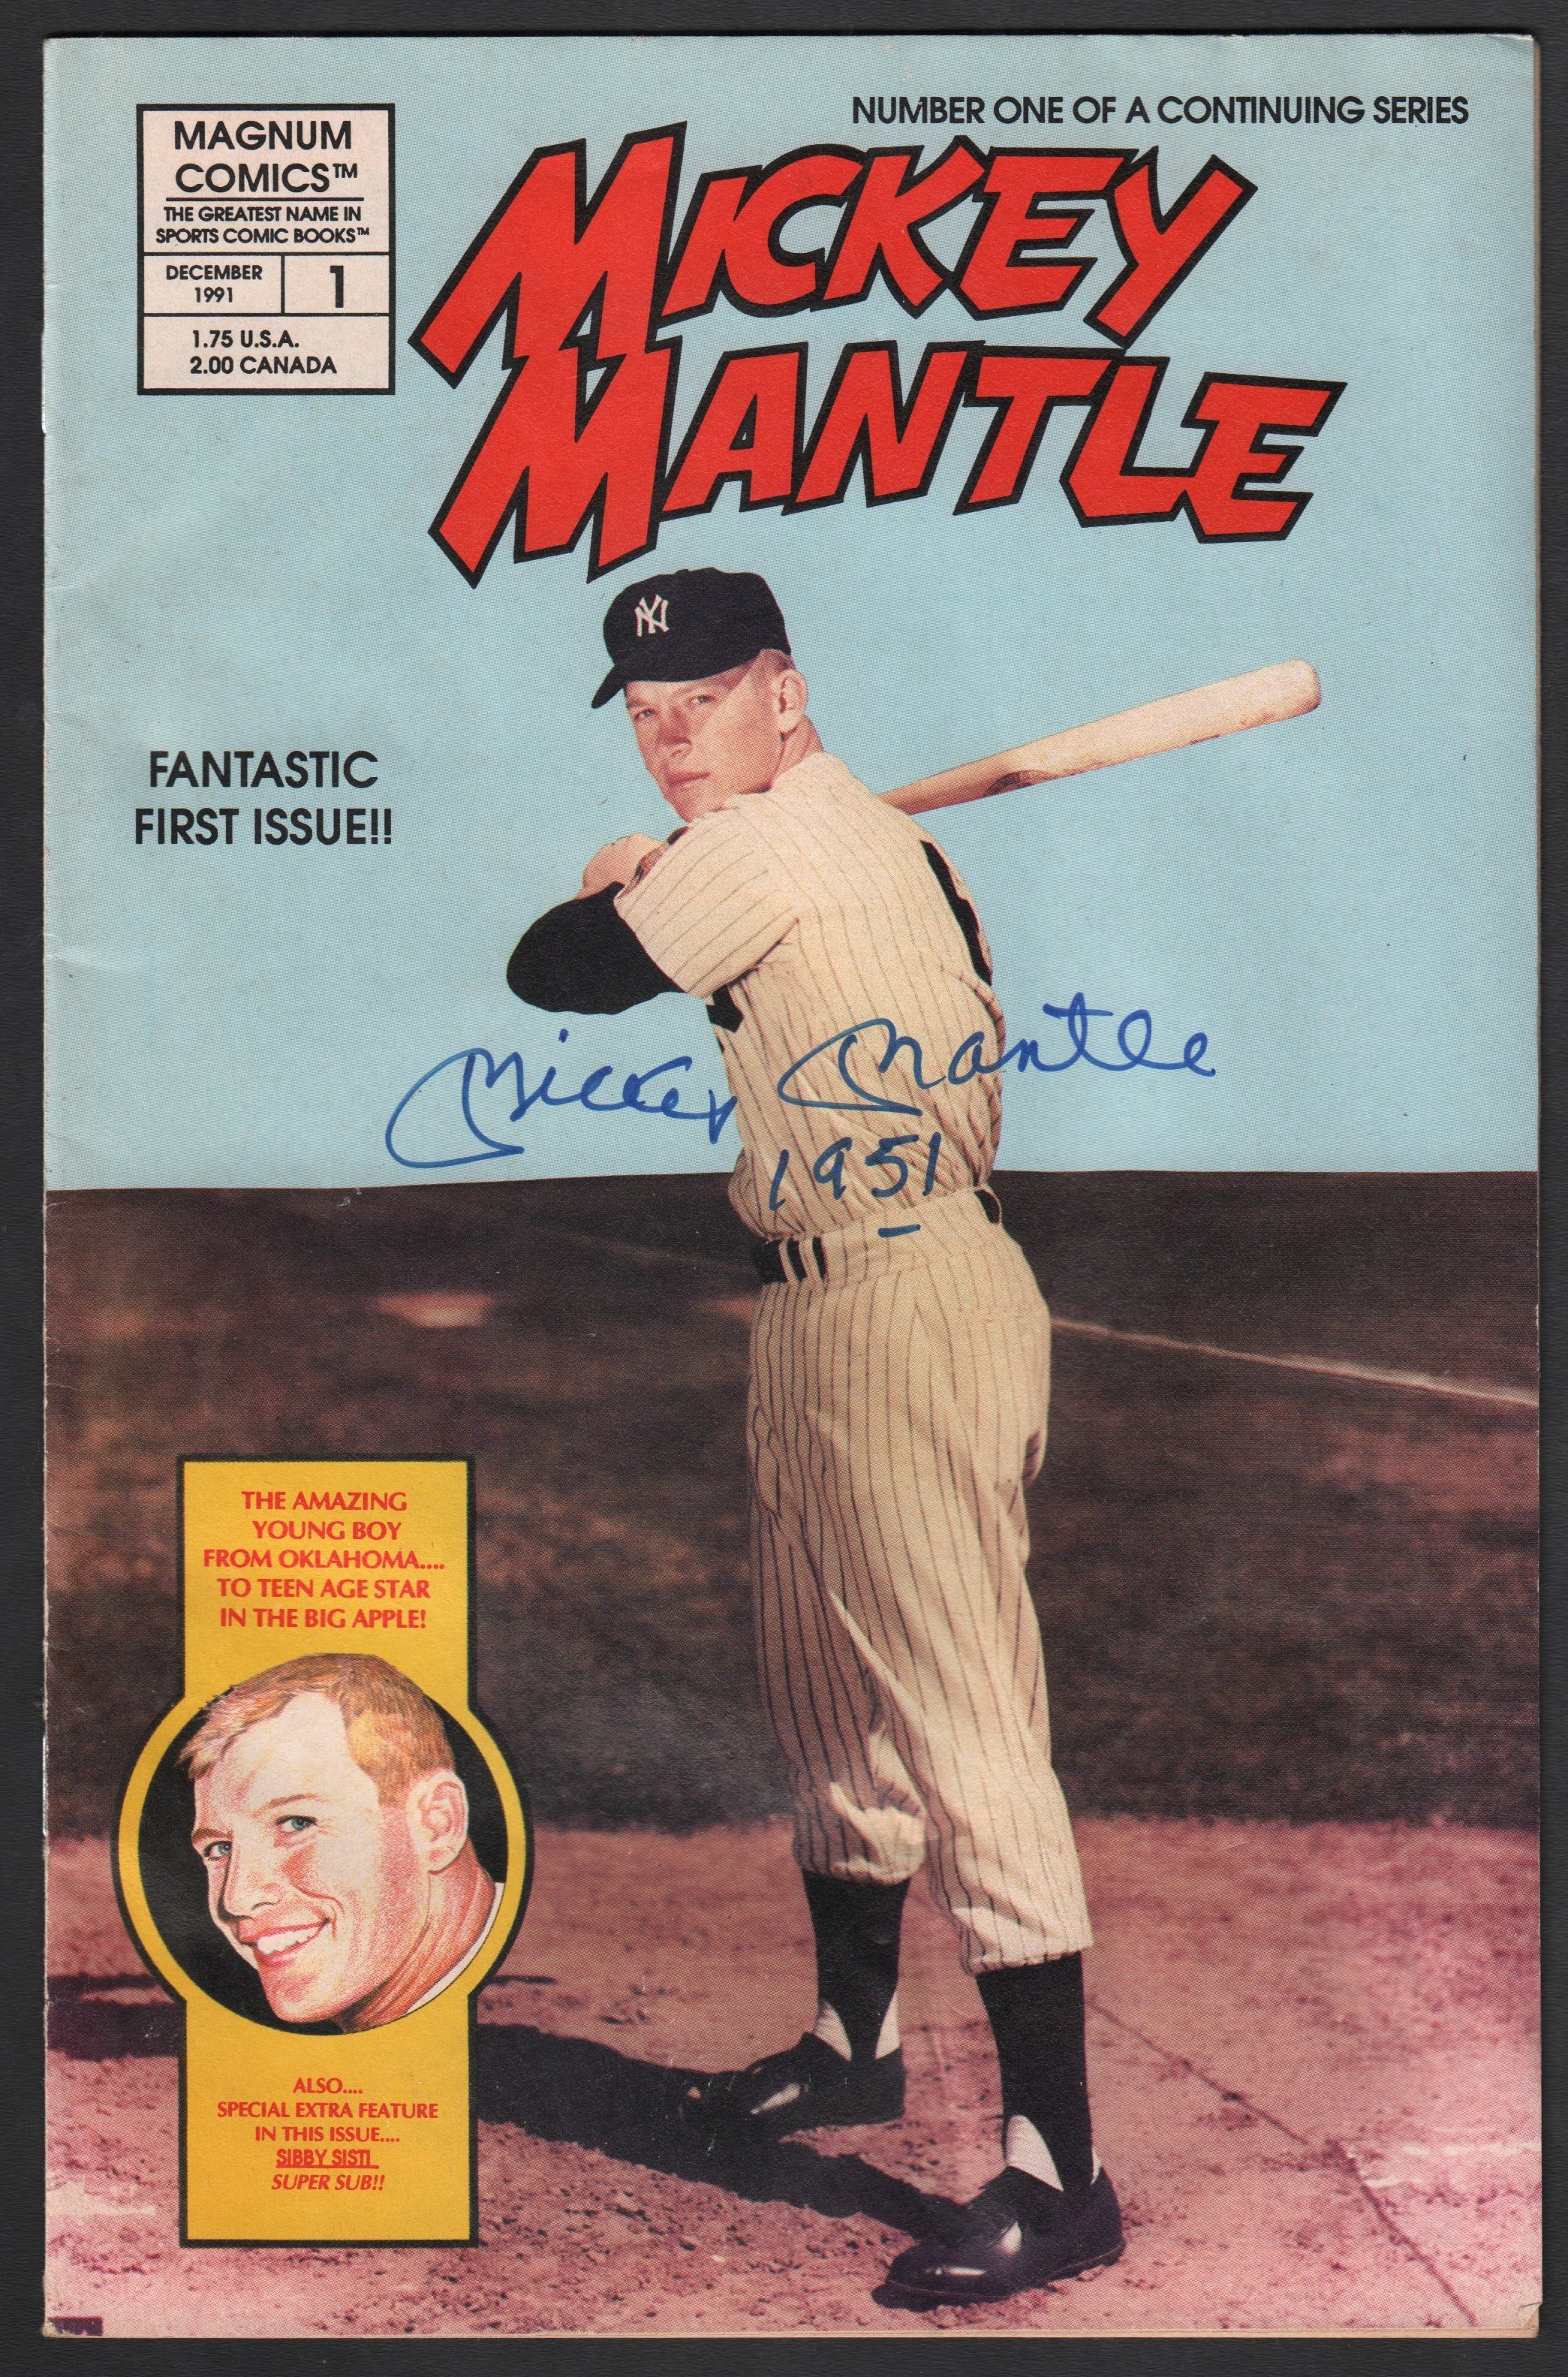 - 1991 Mickey Mantle "1951" Signed Comic Book